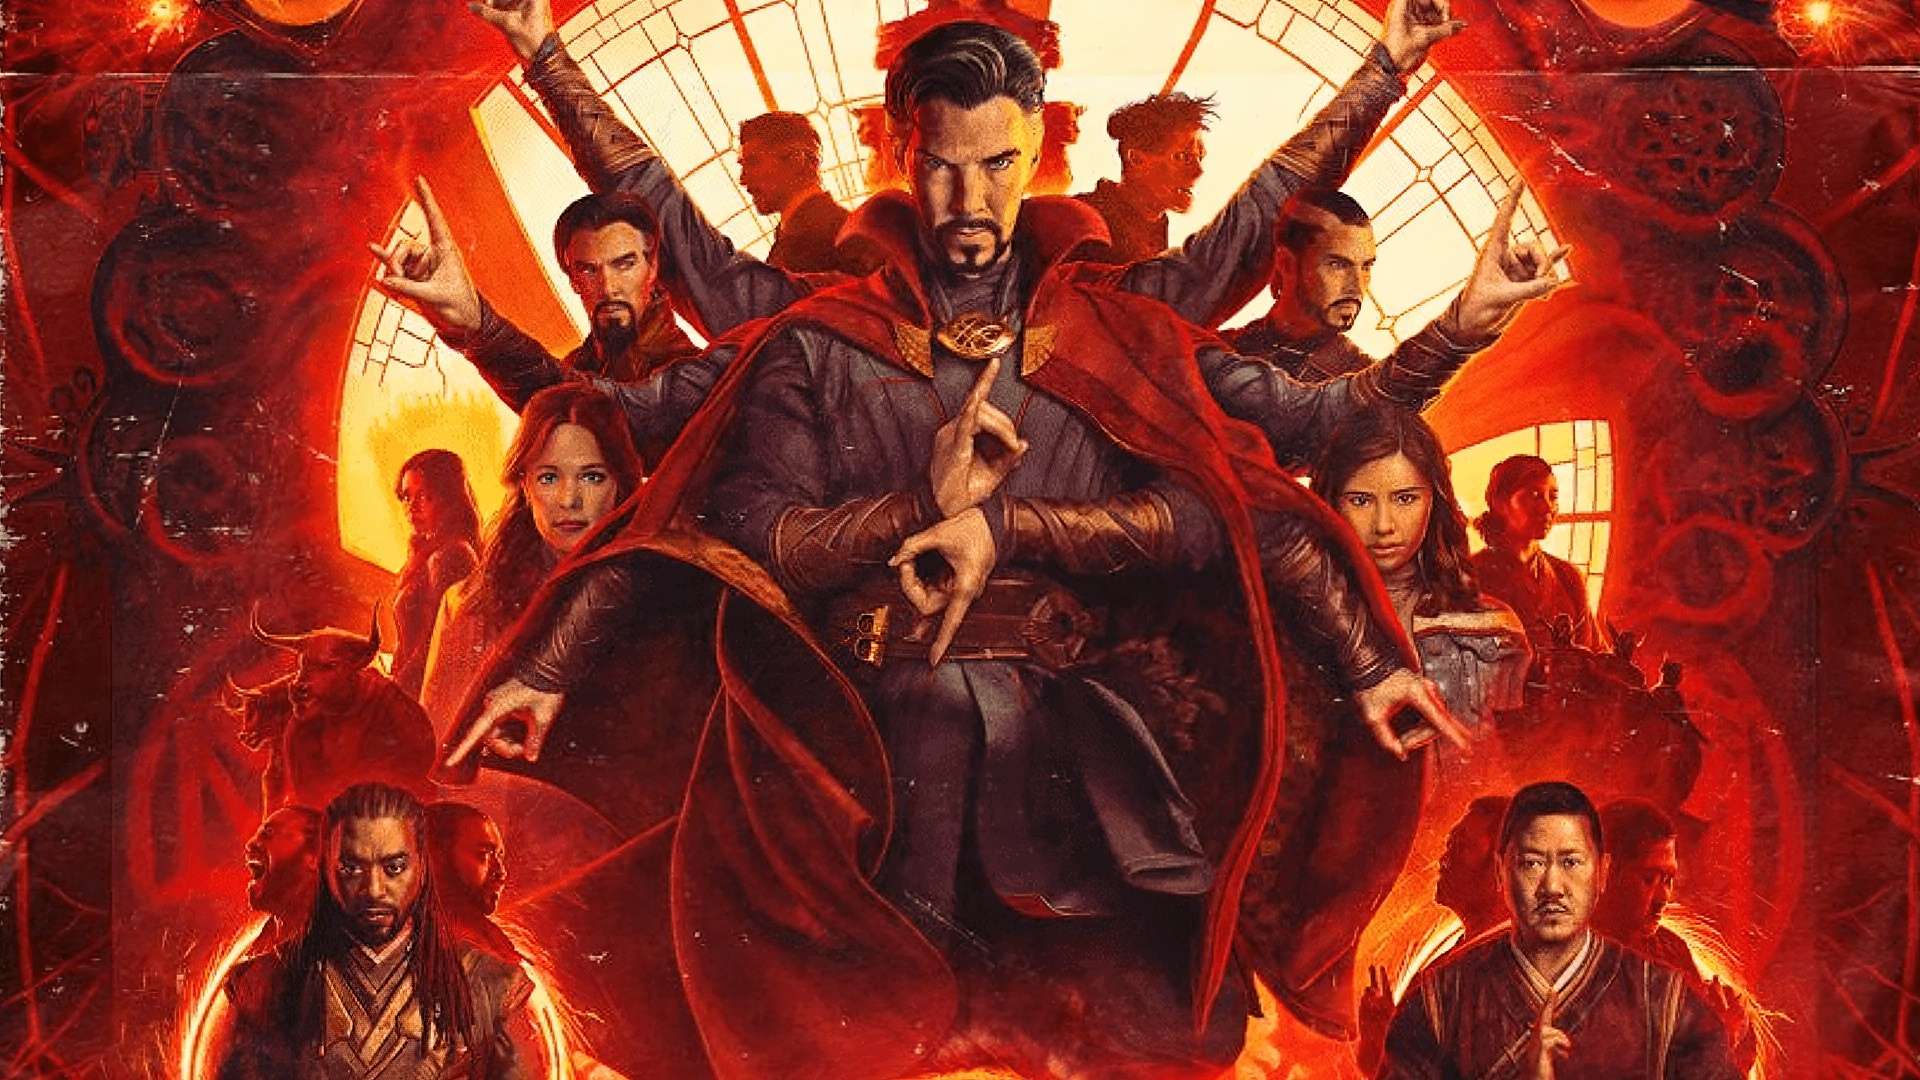 The latest Marvel movie, Doctor Strange in the Multiverse of Madness made Marvel lovers search for Marvel Illuminati, the 21st century’s one of the most fascinating comics supergroups.